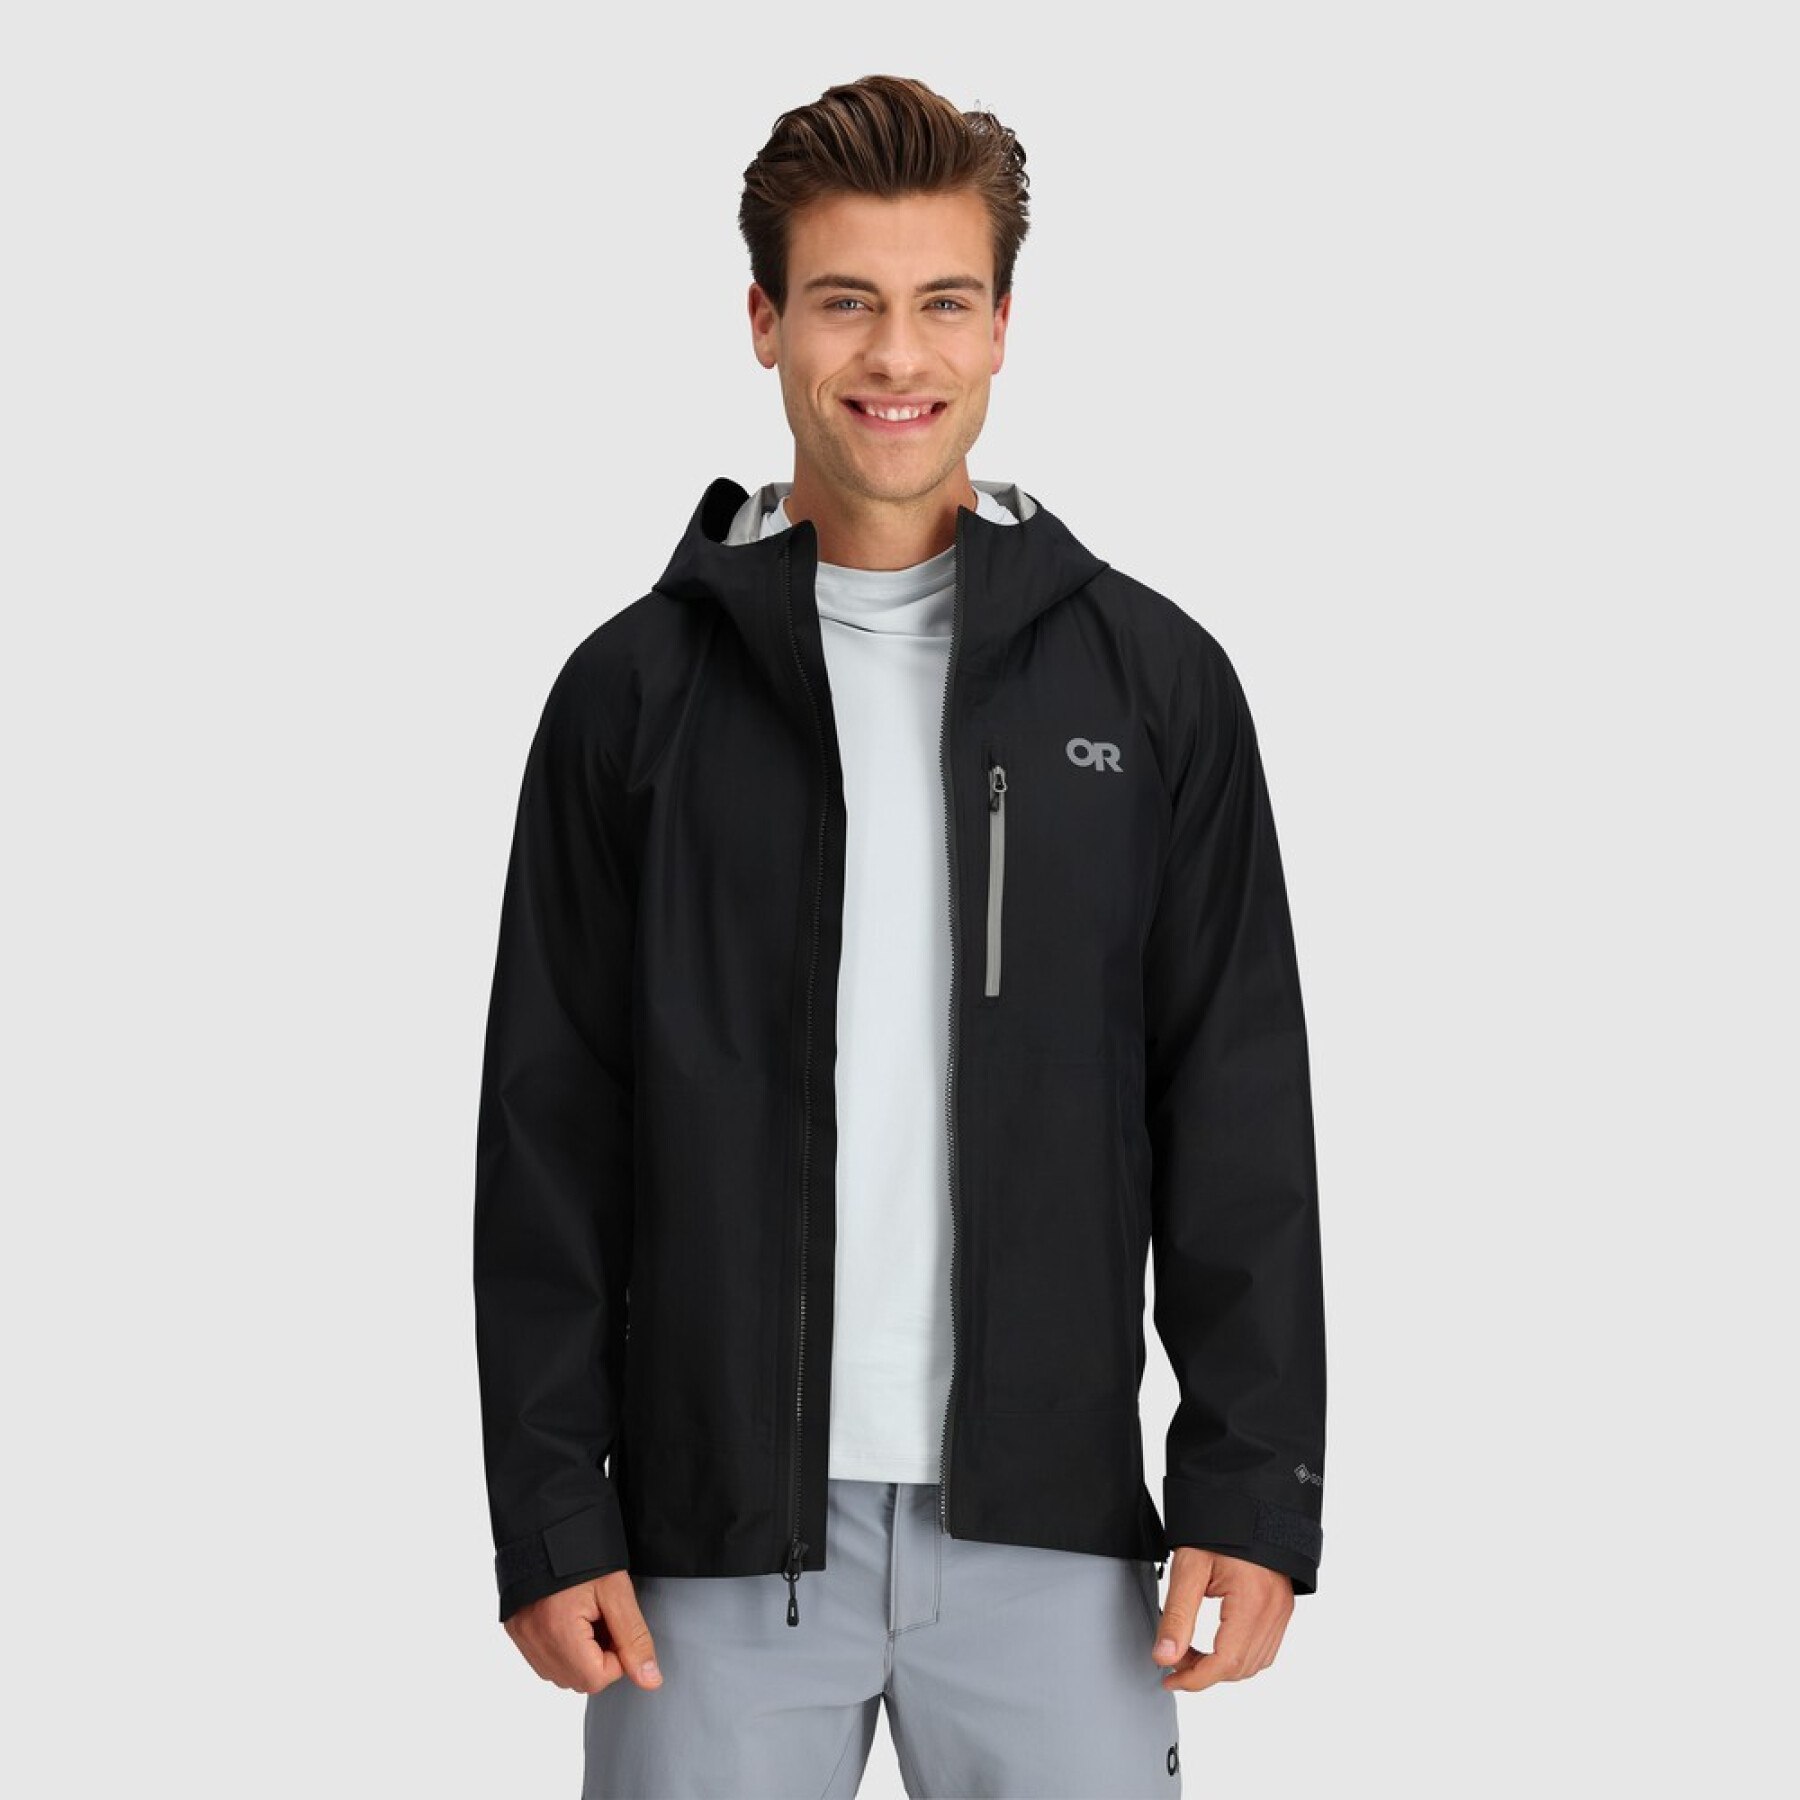 Waterproof jacket Outdoor Research Foray Super Stretch